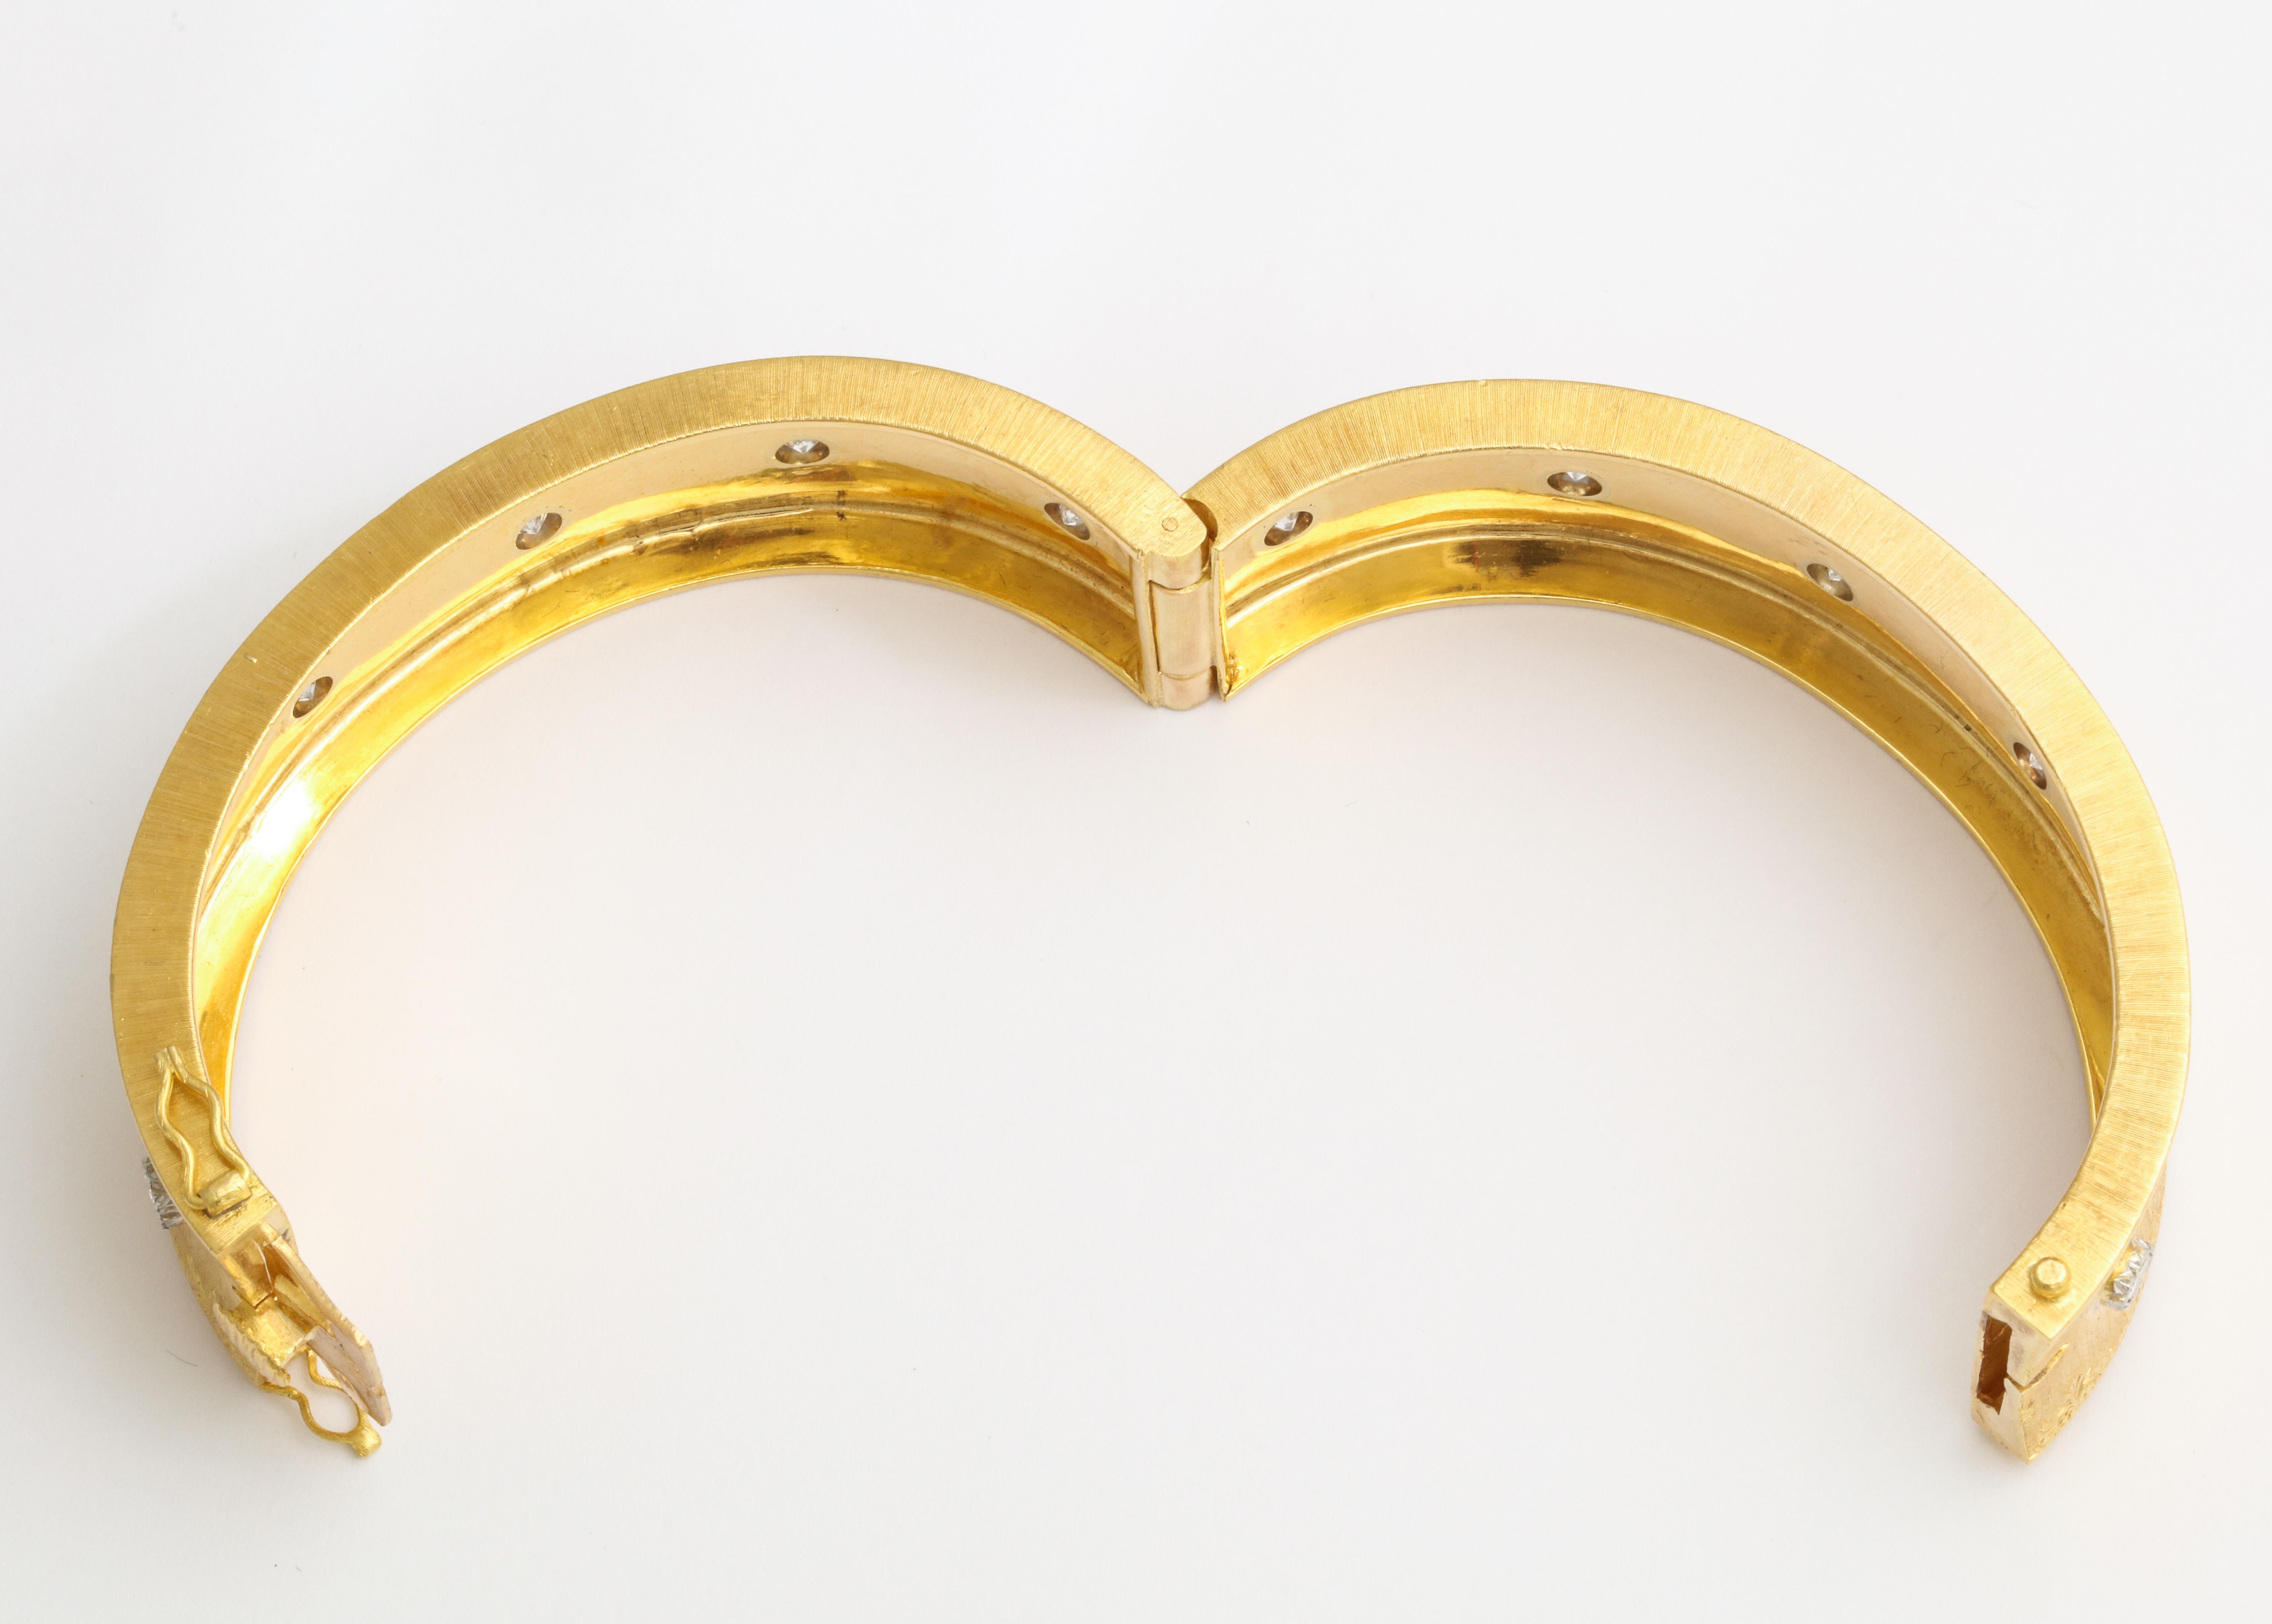 Mario Buccellati 18 Karat Yellow Gold and Diamond Bangle Bracelet, circa 1970s In Good Condition For Sale In New York, NY